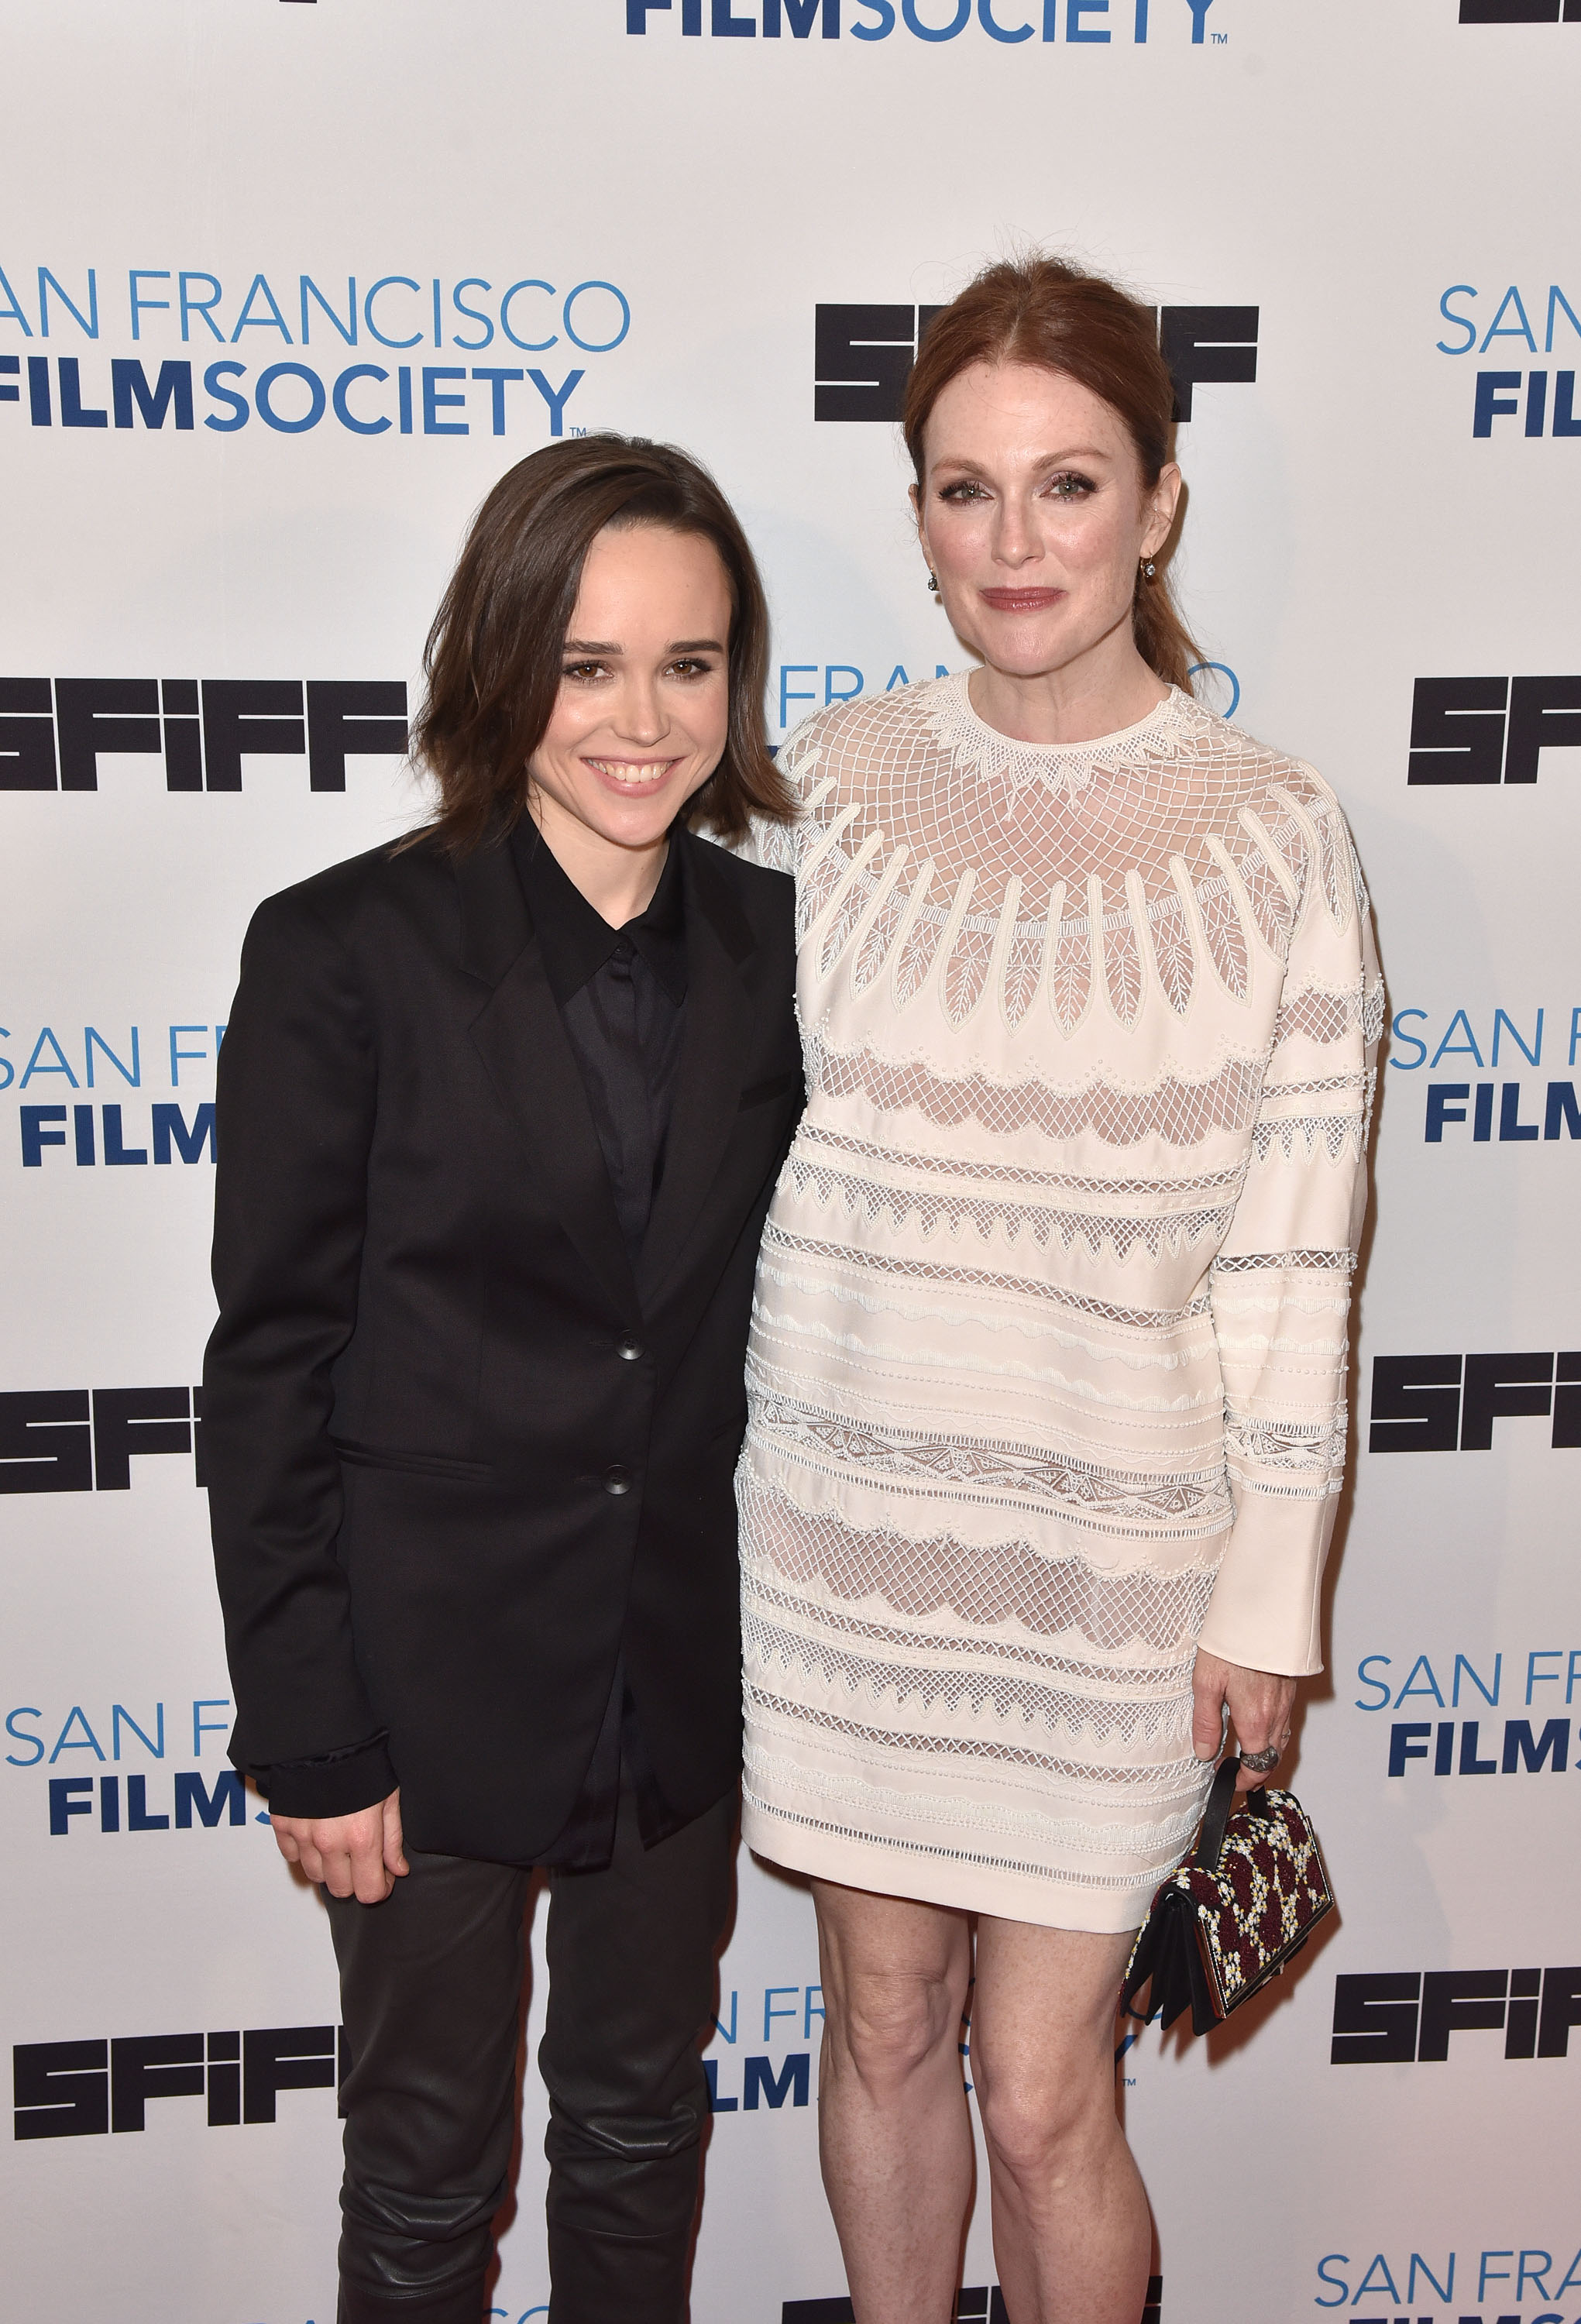 Elliot Page and Julianne Moore pose during the premiere screening of "Freeheld" on October 7, 2015 | Source: Getty Images